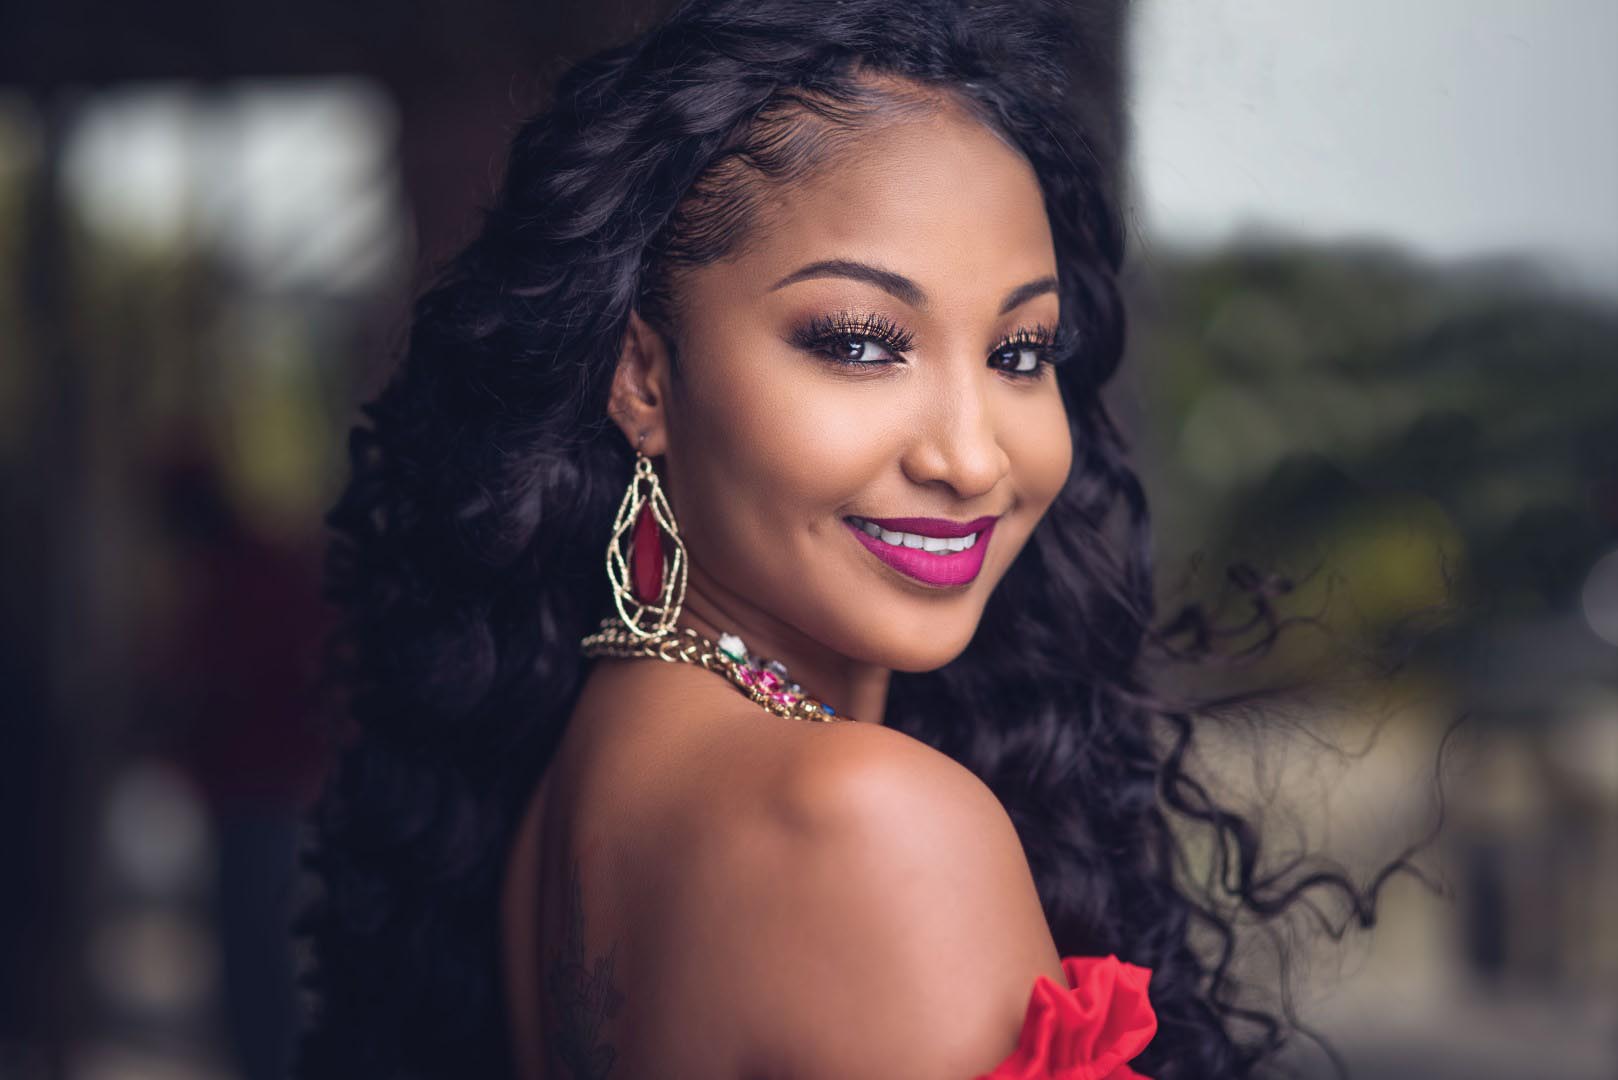 black & white chic Throwback: Shenseea - The World is Hers for the Taking